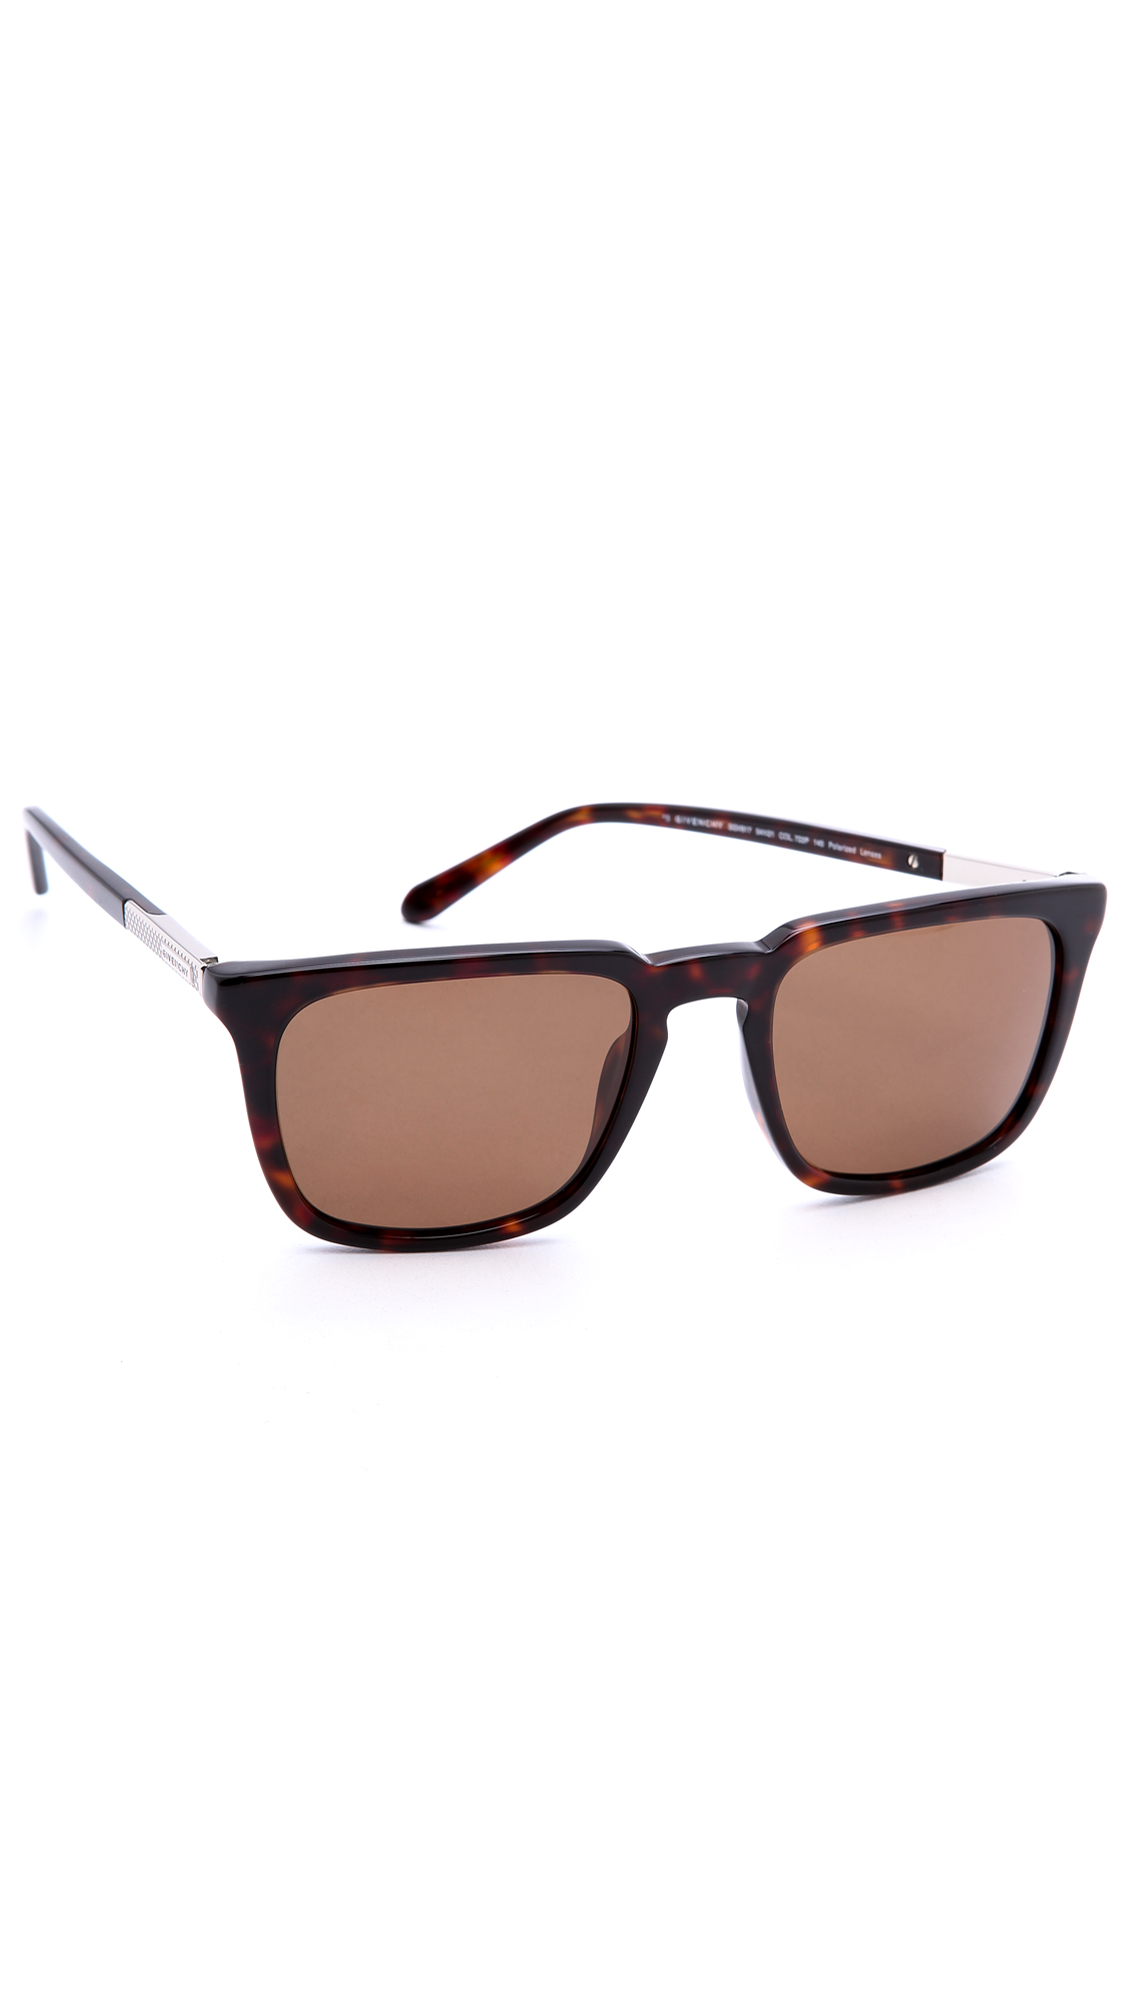 Lyst - Givenchy Sgv817 Polarized Sunglasses in Brown for Men